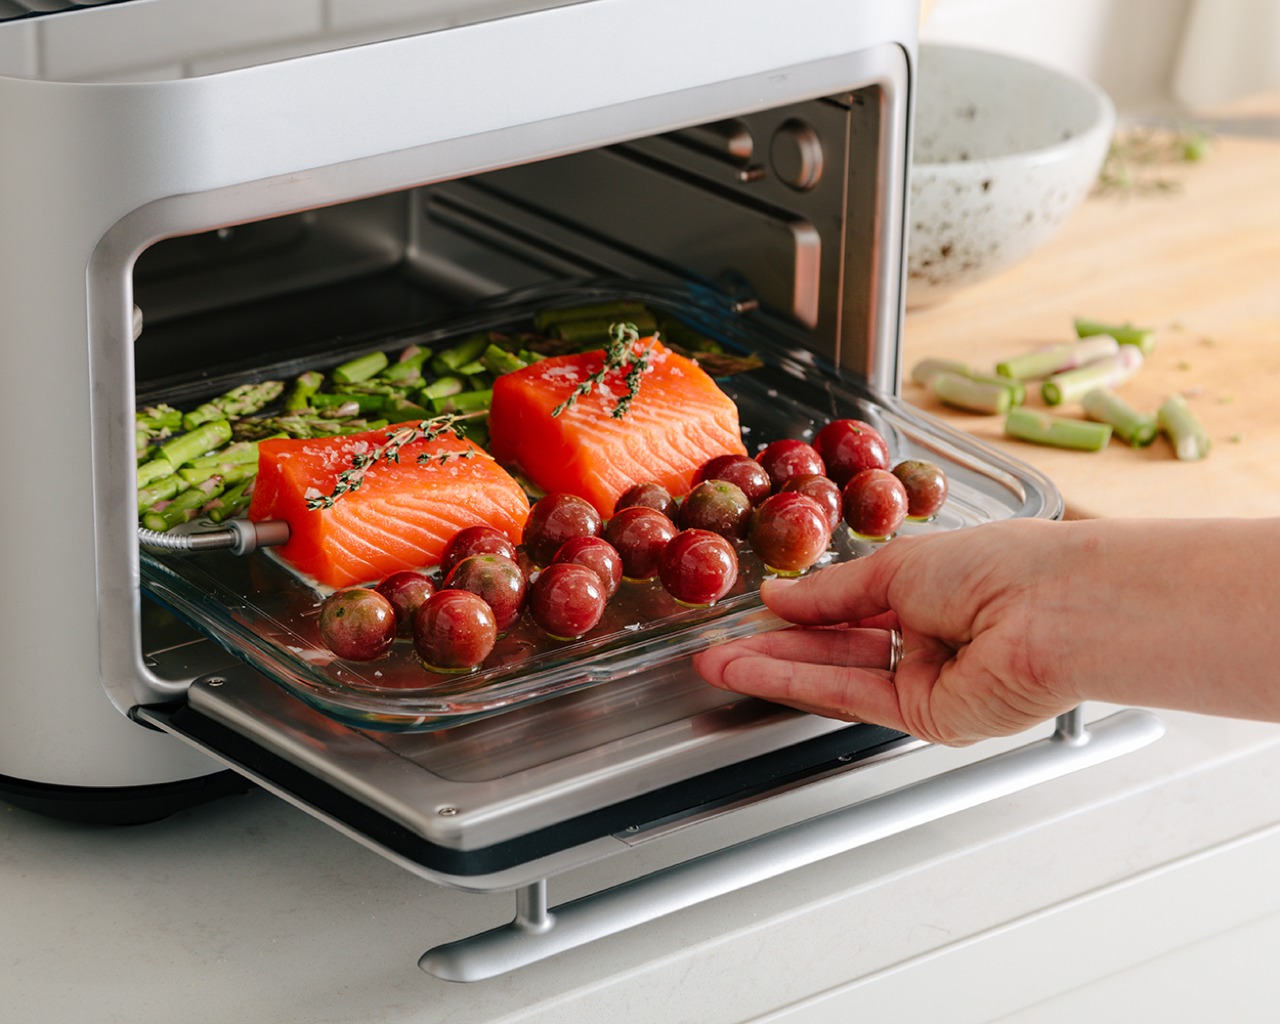 The ‘Tesla of Ovens’ uses light to cook your food better, easier, and faster than ever